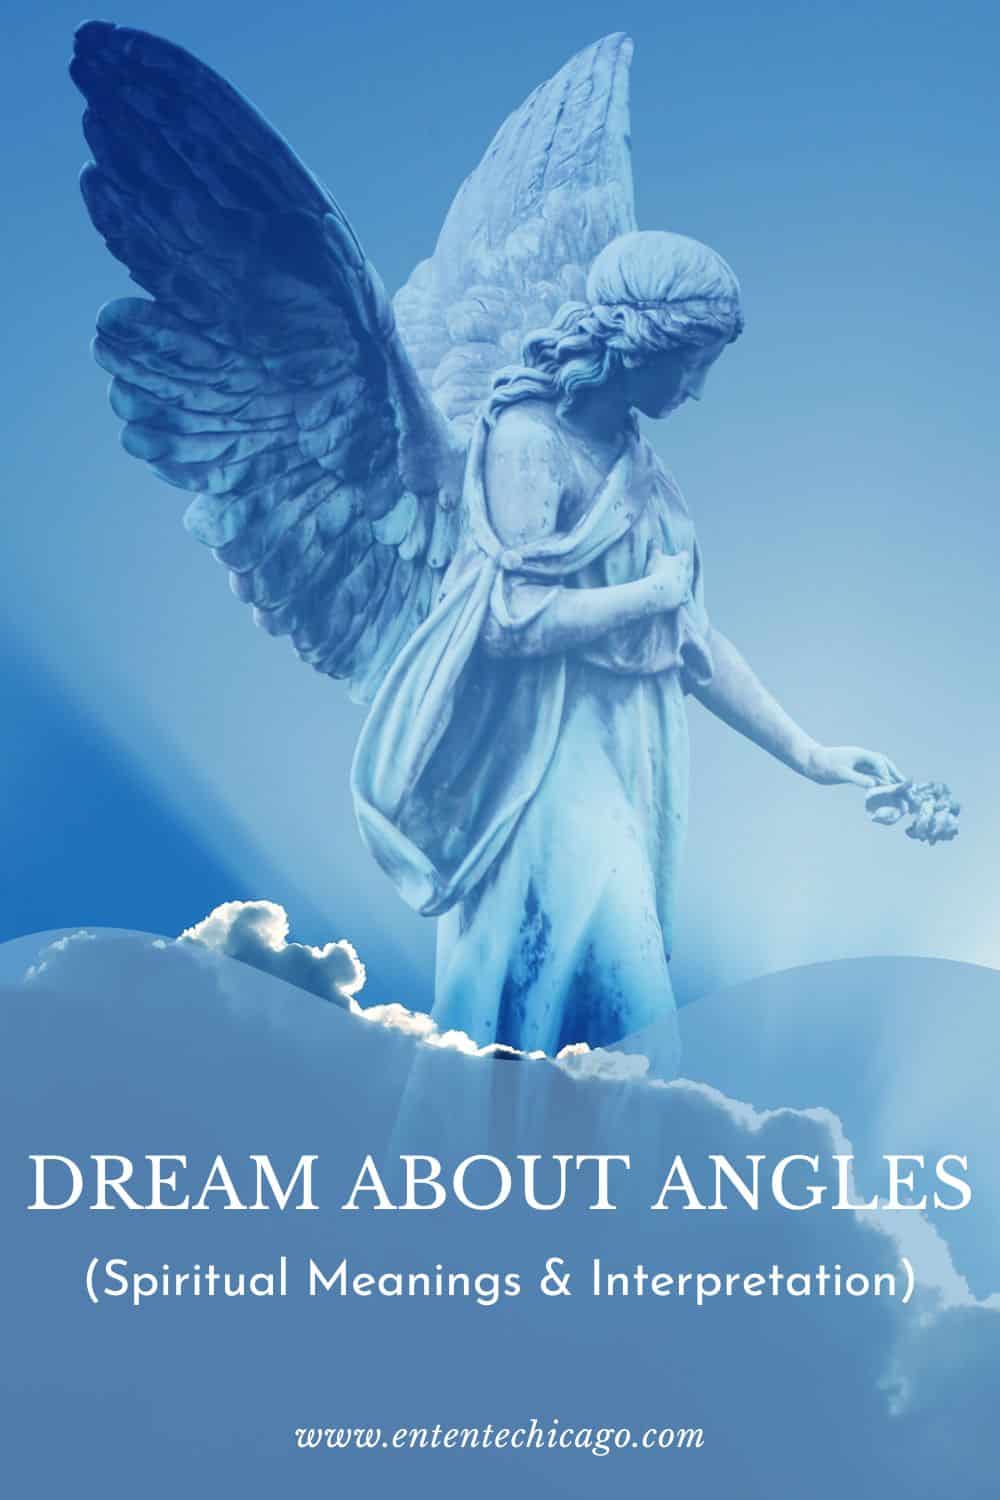 Dream About Angles (Spiritual Meanings & Interpretation)